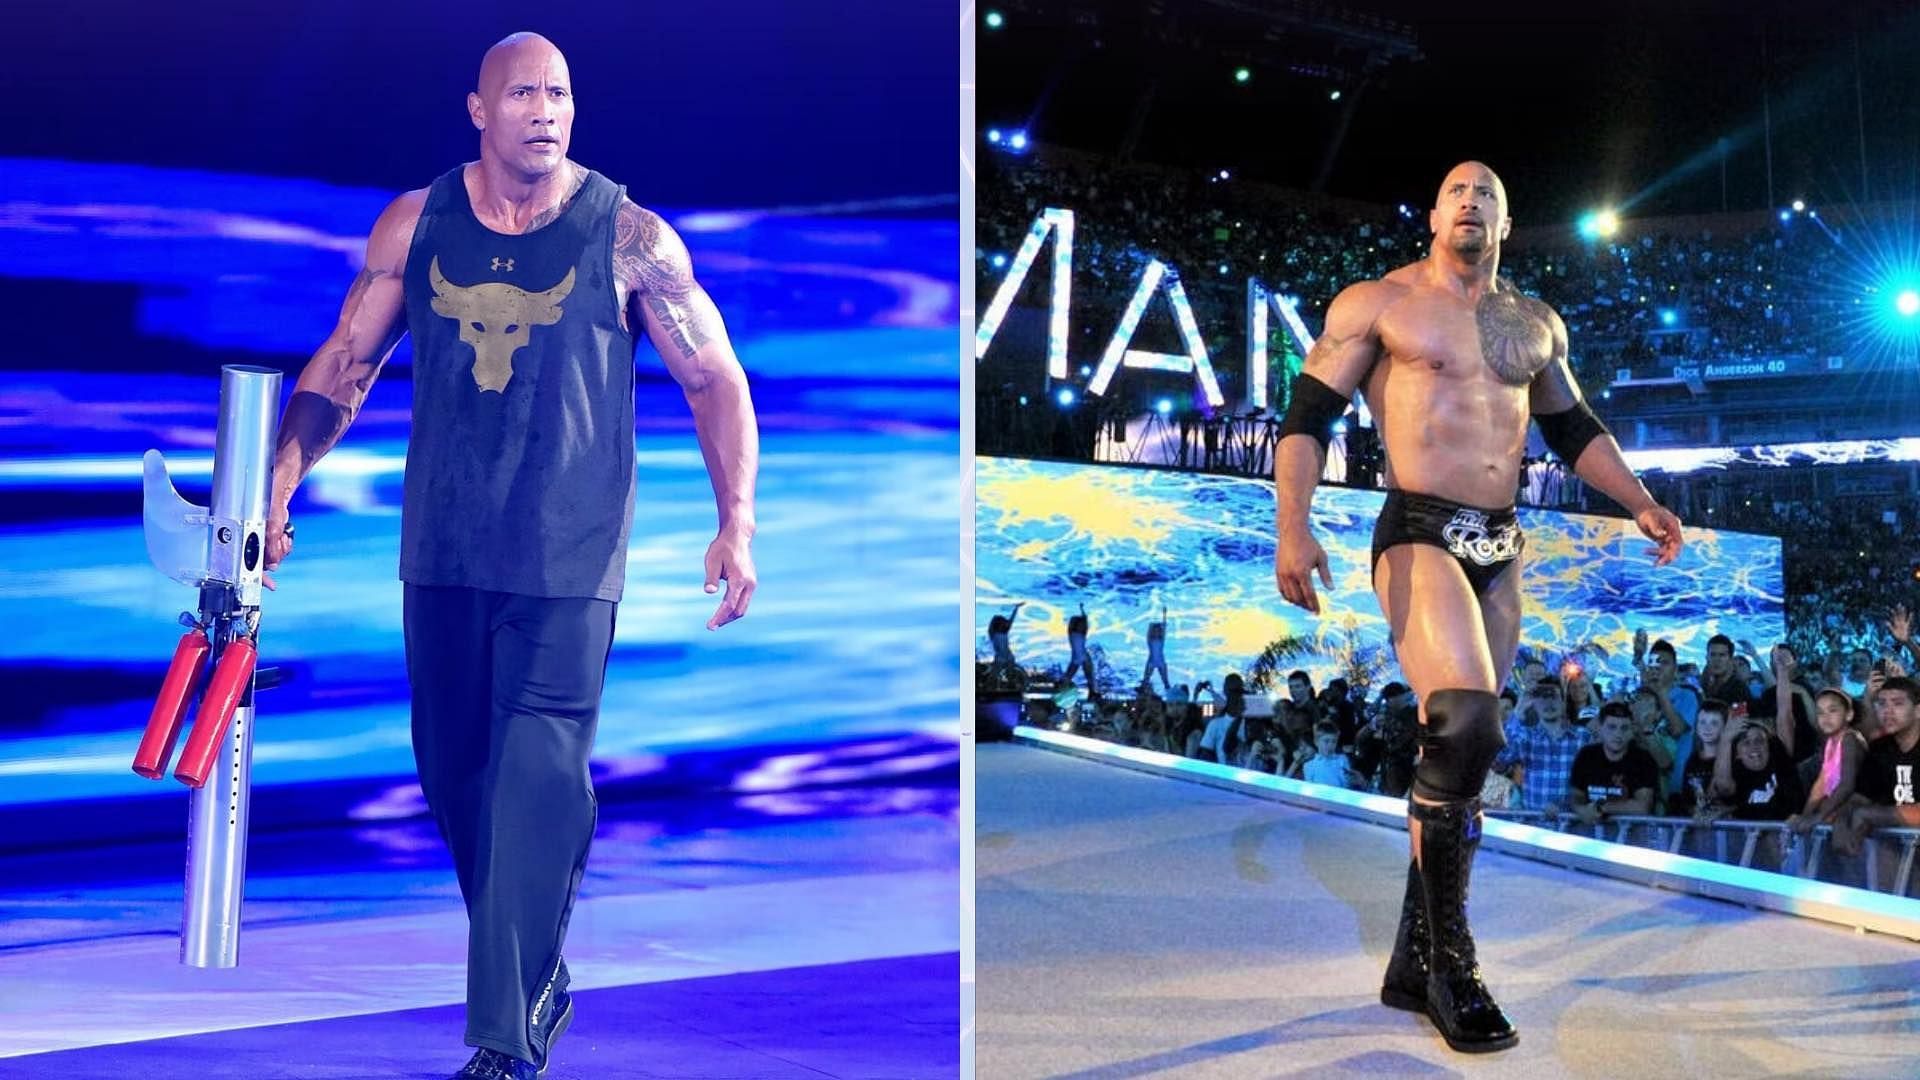 The Rock has had classic matches at WWE WrestleMania